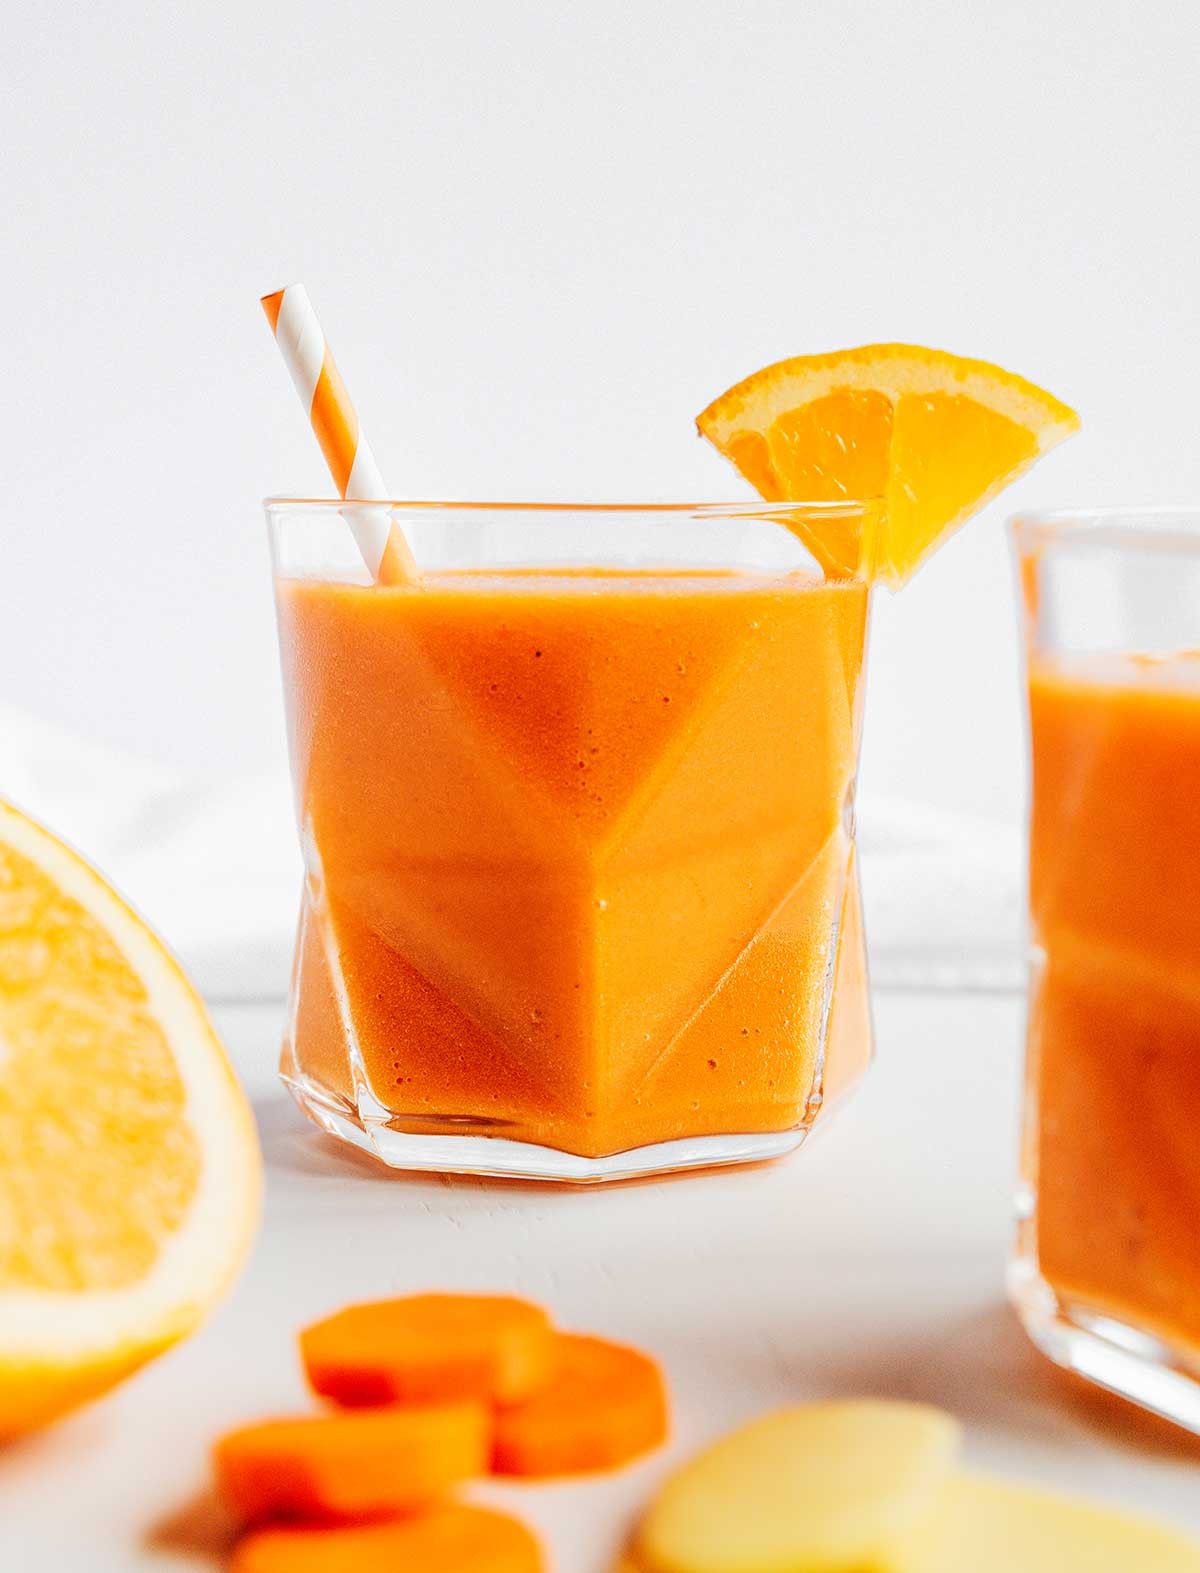 If you're looking for a health boost this holiday, this smoothie is the perfect addition to your Easter brunch. It's creamy, has tons of nutrients, and even recalls Easter by using carrots. (via Live Eat Learn)